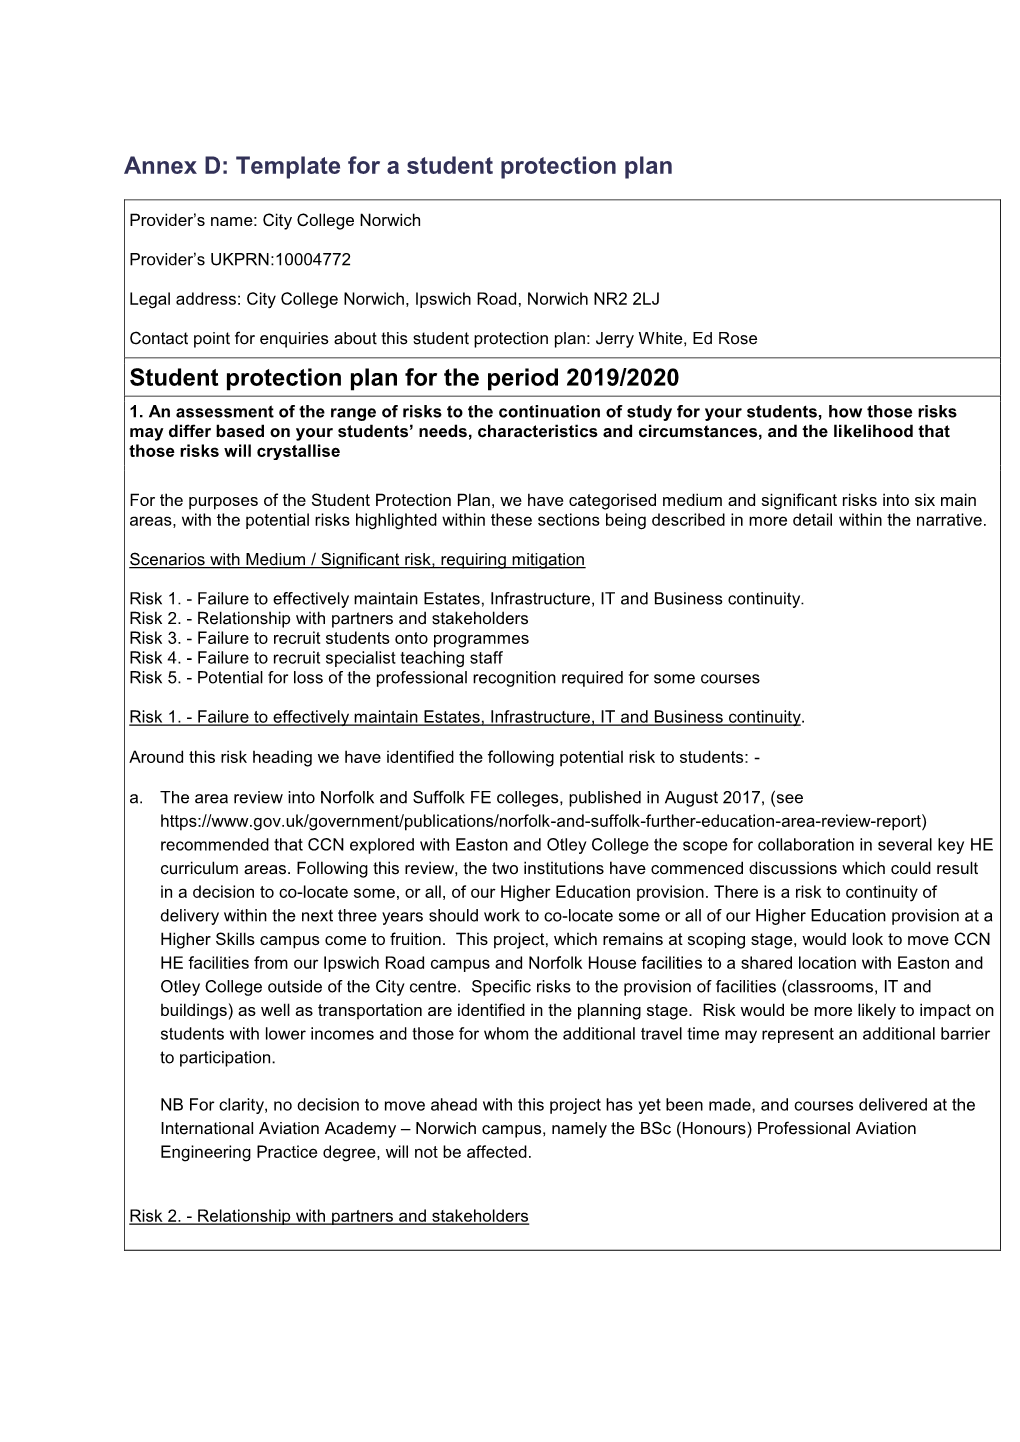 Annex D: Template for a Student Protection Plan